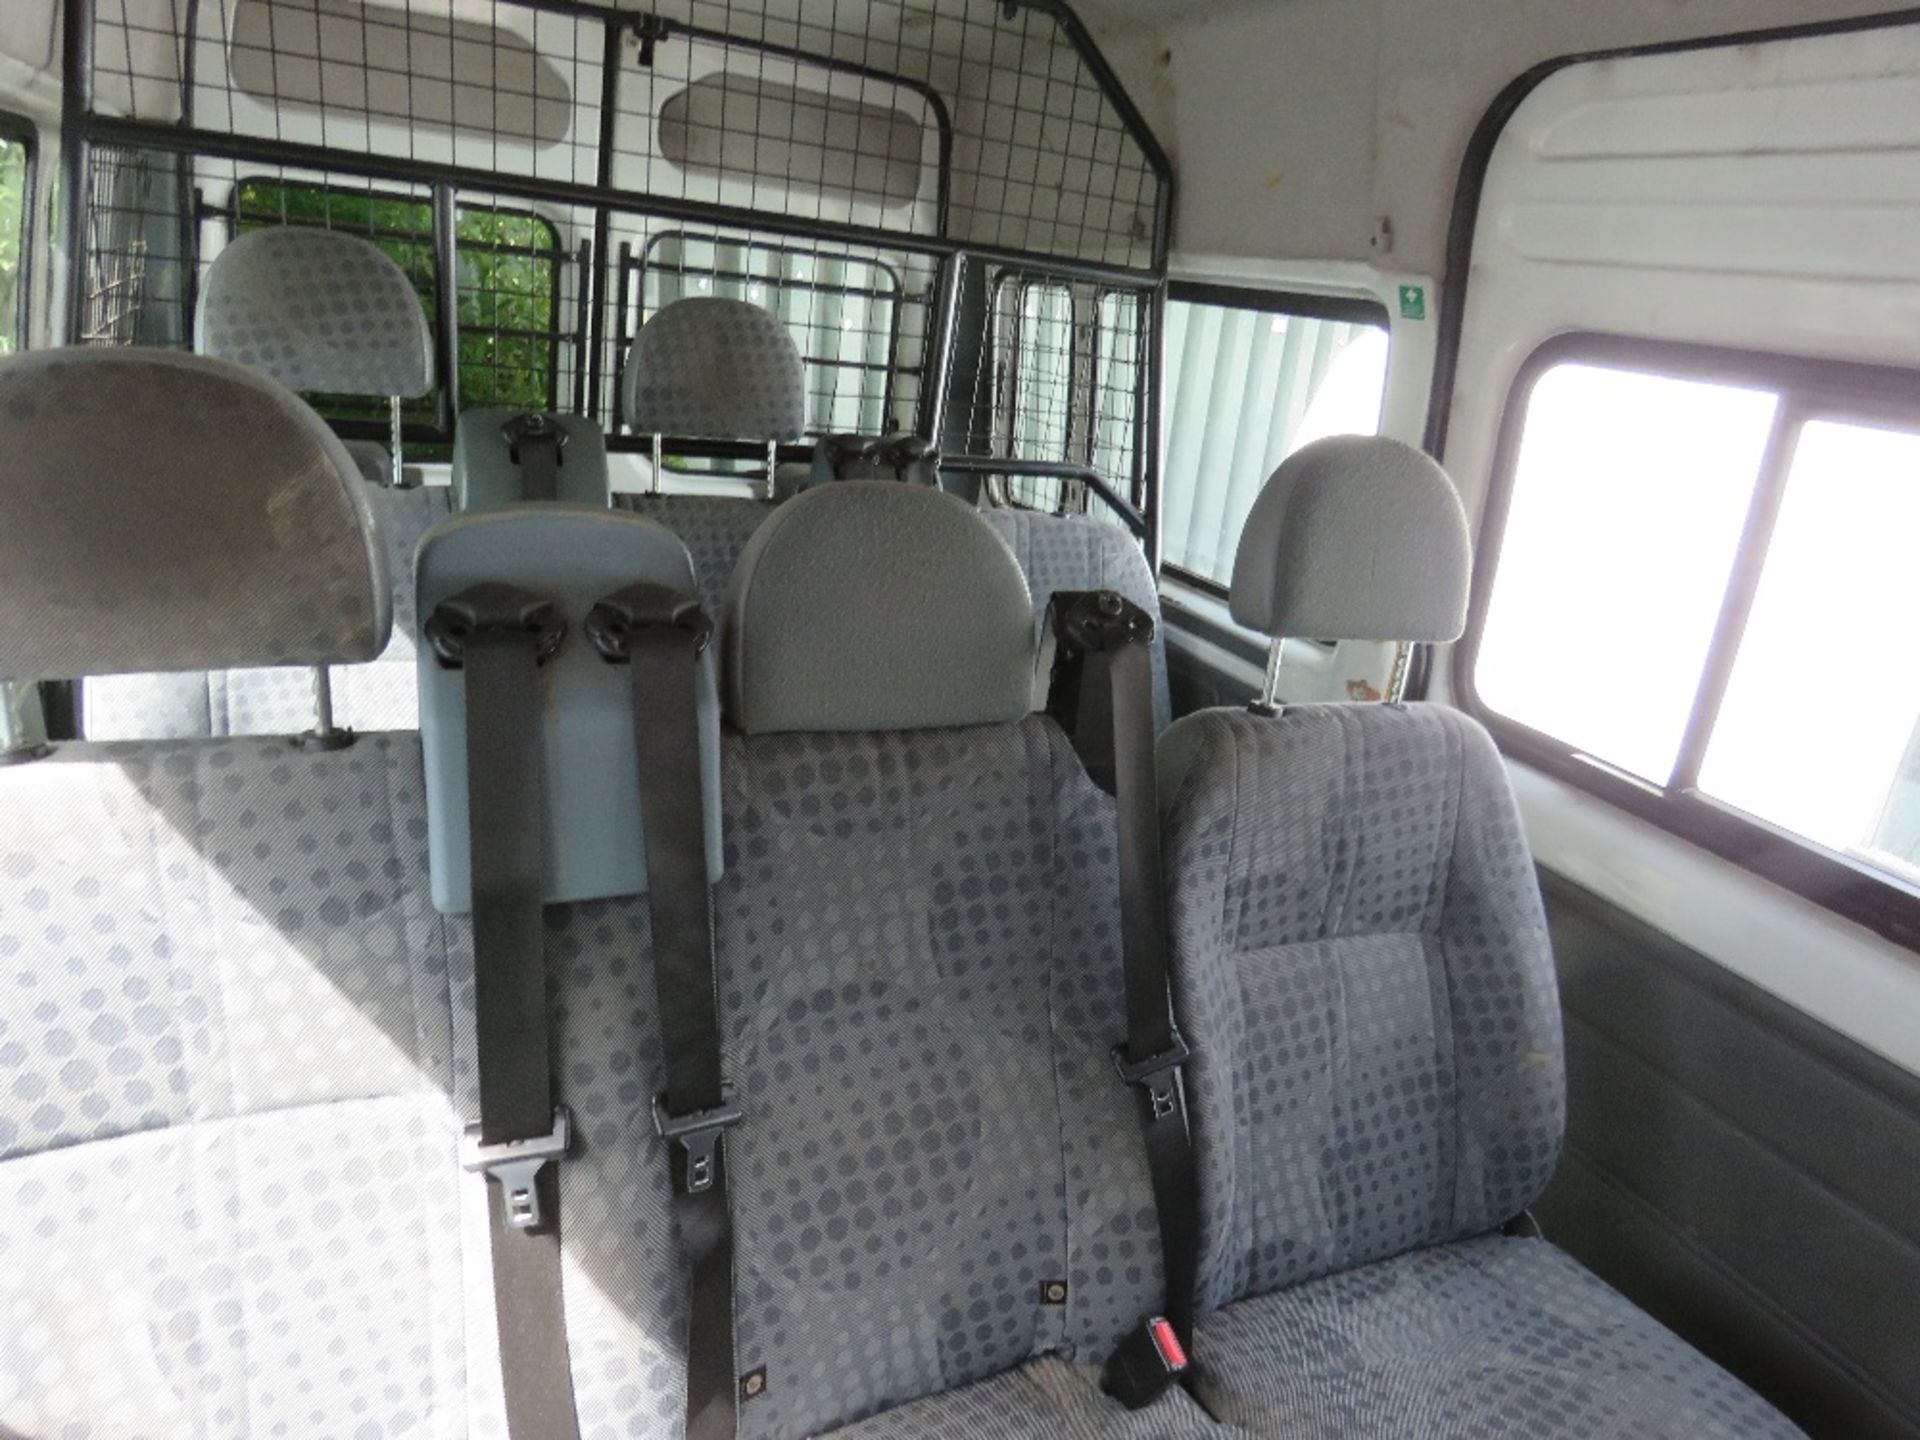 FORD TRANSIT 9 SEATER CREW MINI BUS VAN WITH REAR STORAGE, REG: MF11 NNK TESTED TILL 08/04/21, 156, - Image 4 of 5